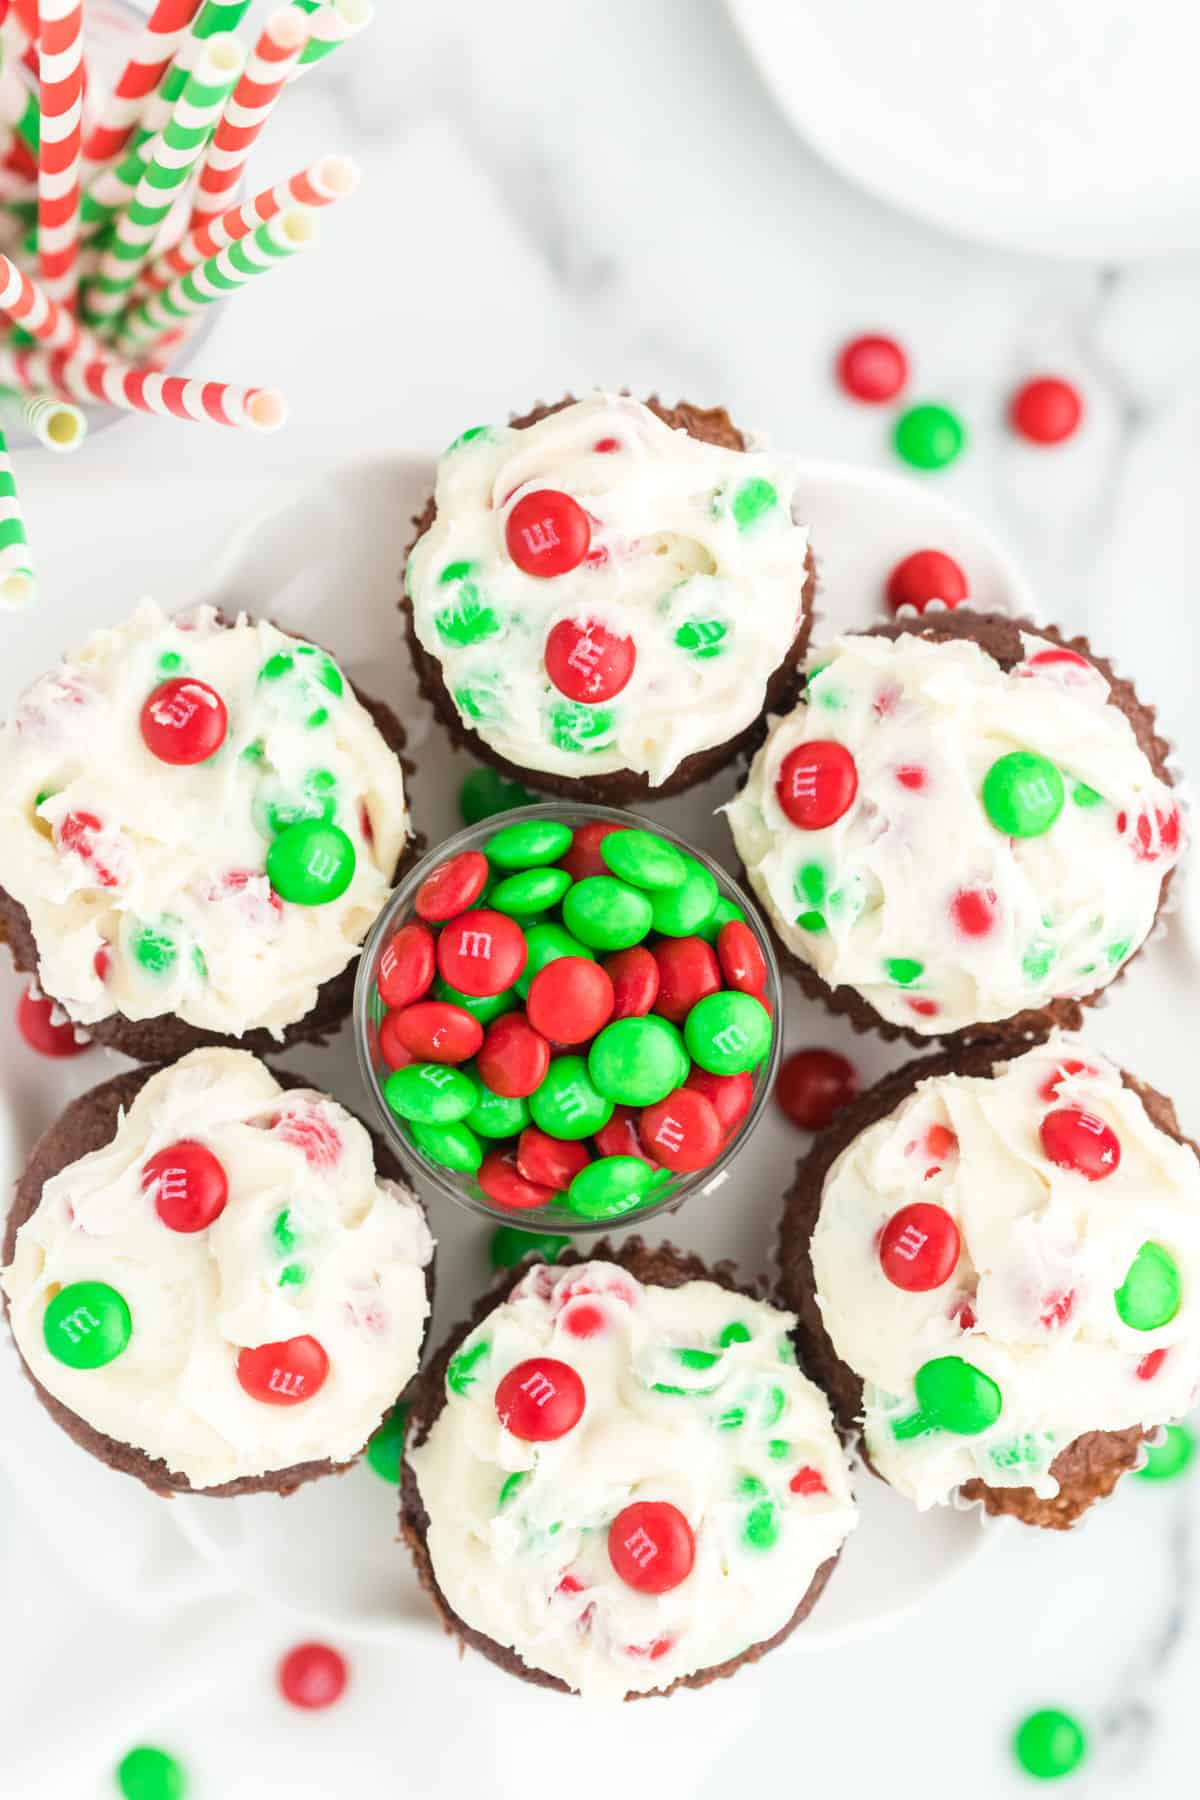 Holiday frosted chocolate cupcakes with m&ms.